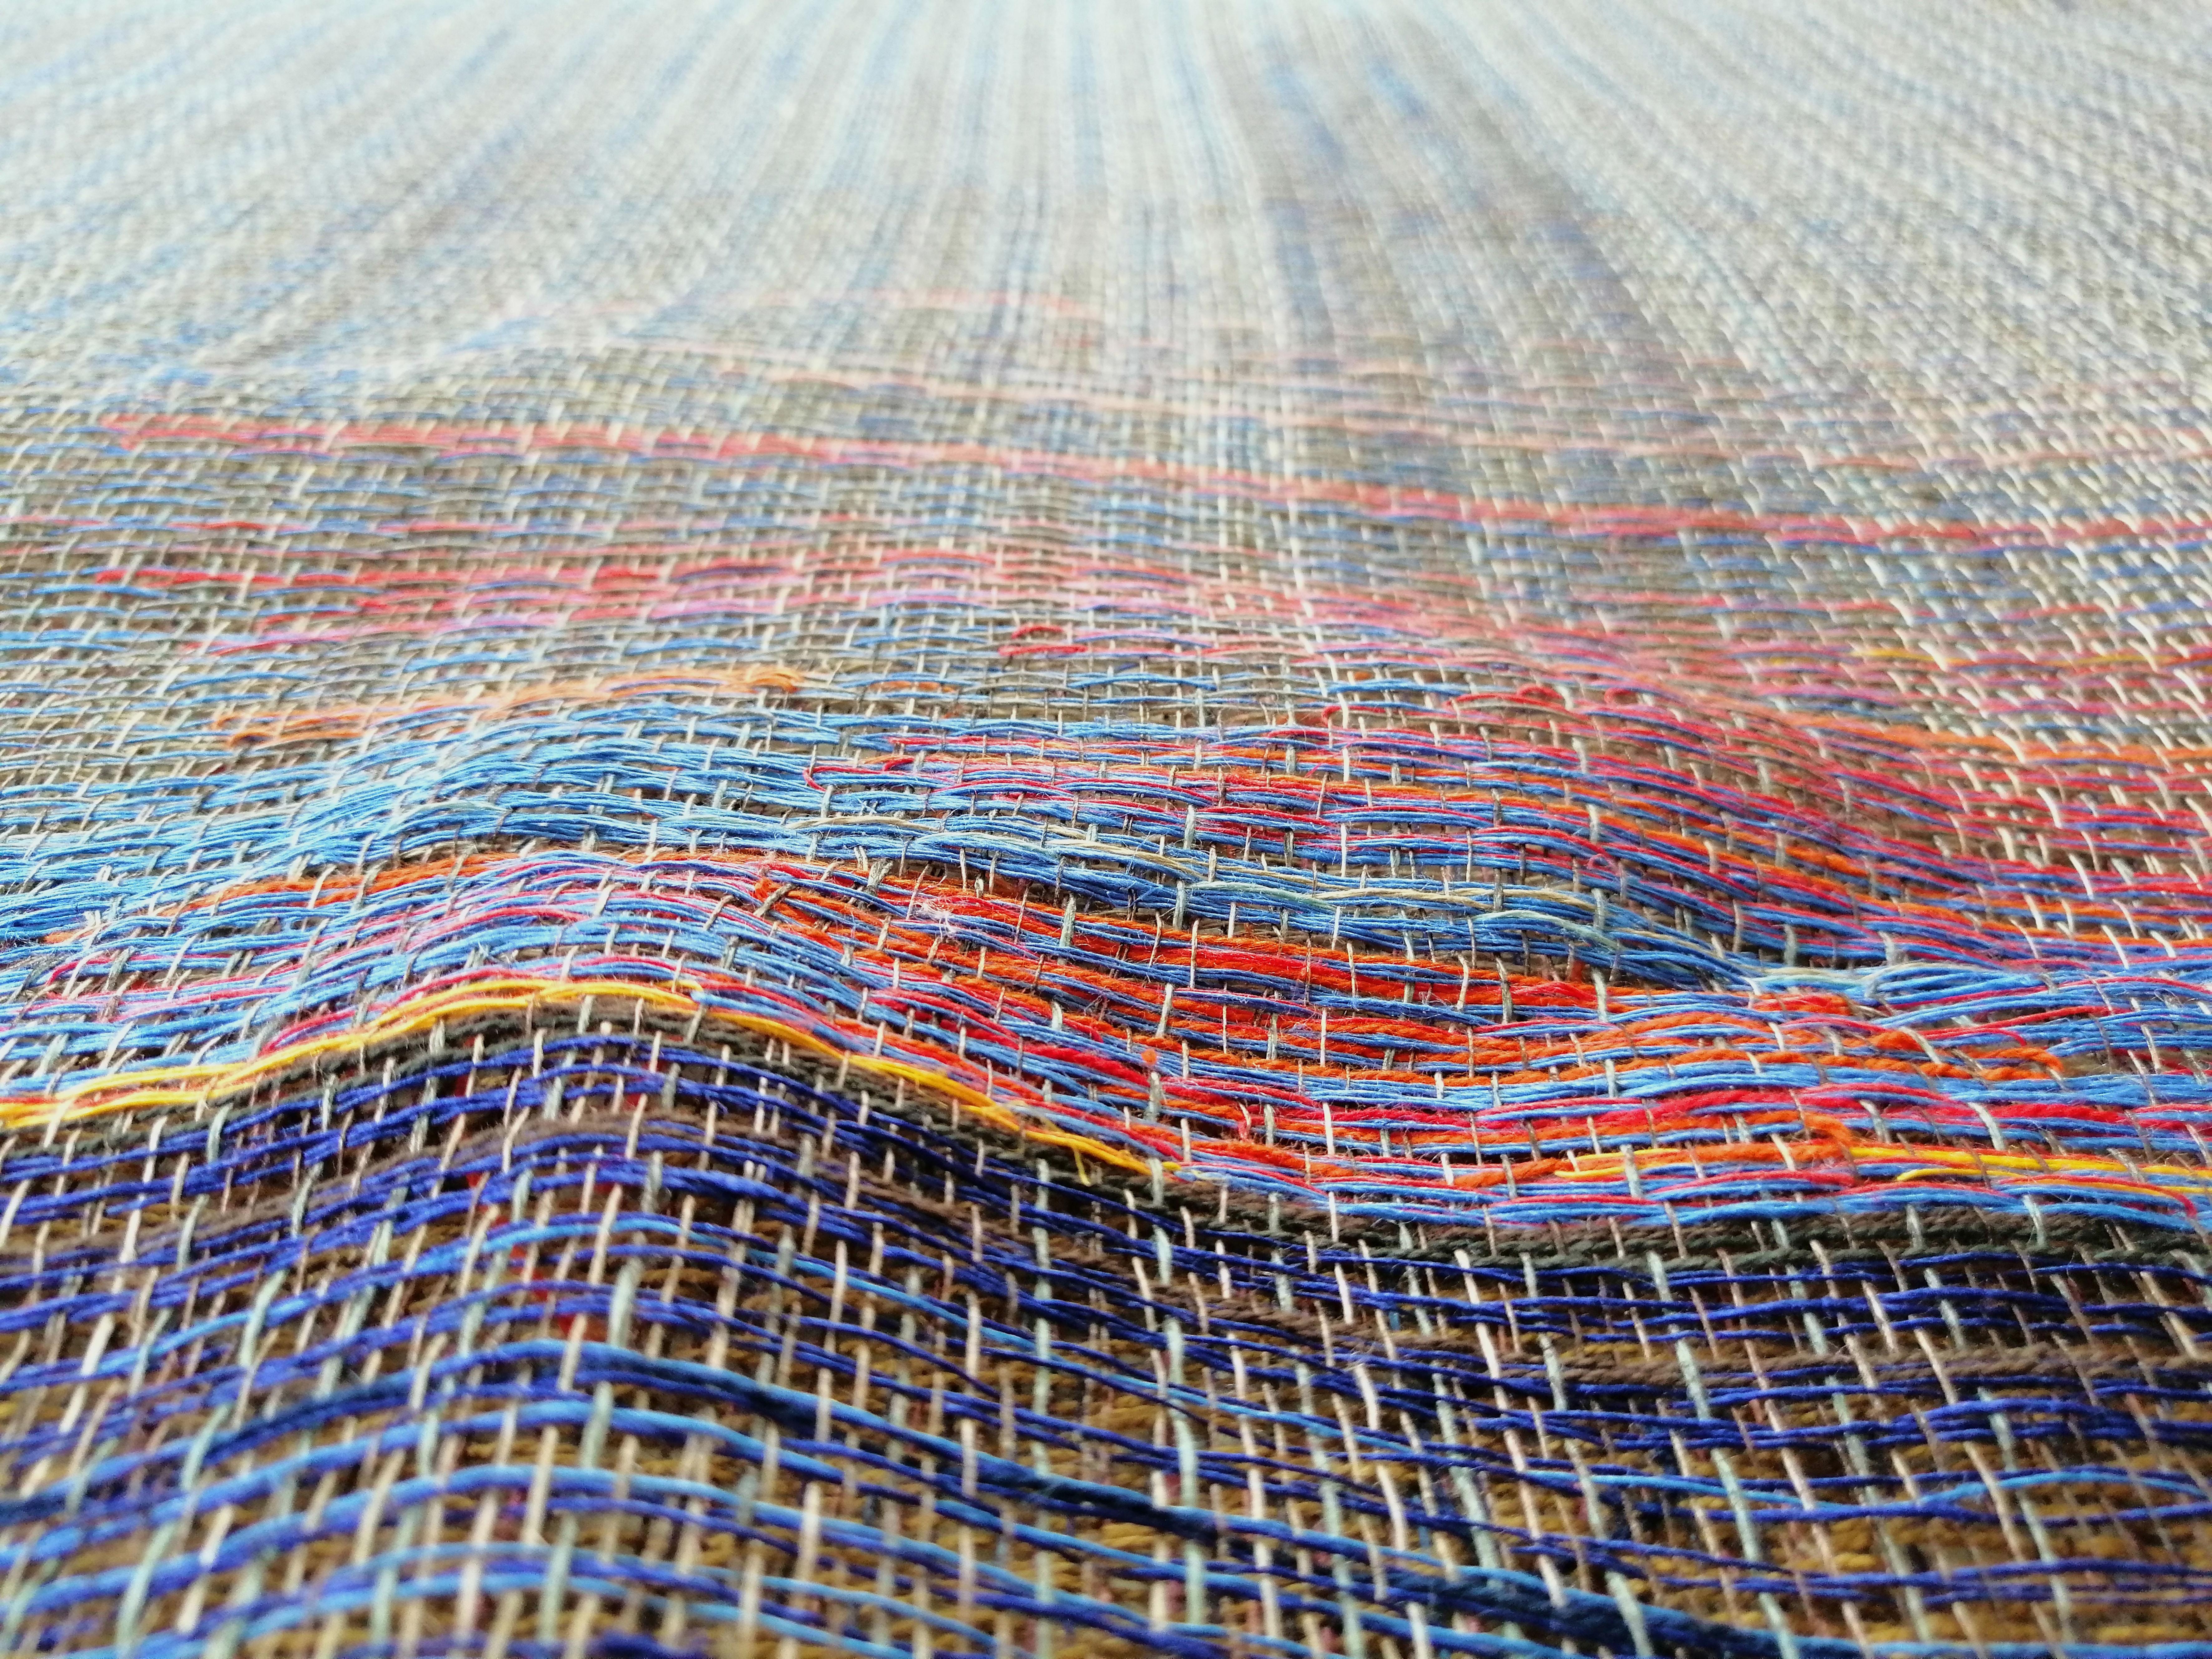 ‘Horizon. Cabo Sardão’ 2020
Handwoven painting, linen, woollen, silk, cotton yarn, acrylic textile paint, 130 x 65 cm

Handwoven painting from the series ‘Horizons’, based on a portuguese landscape. Canvas is entirely constructed on a weaving loom.